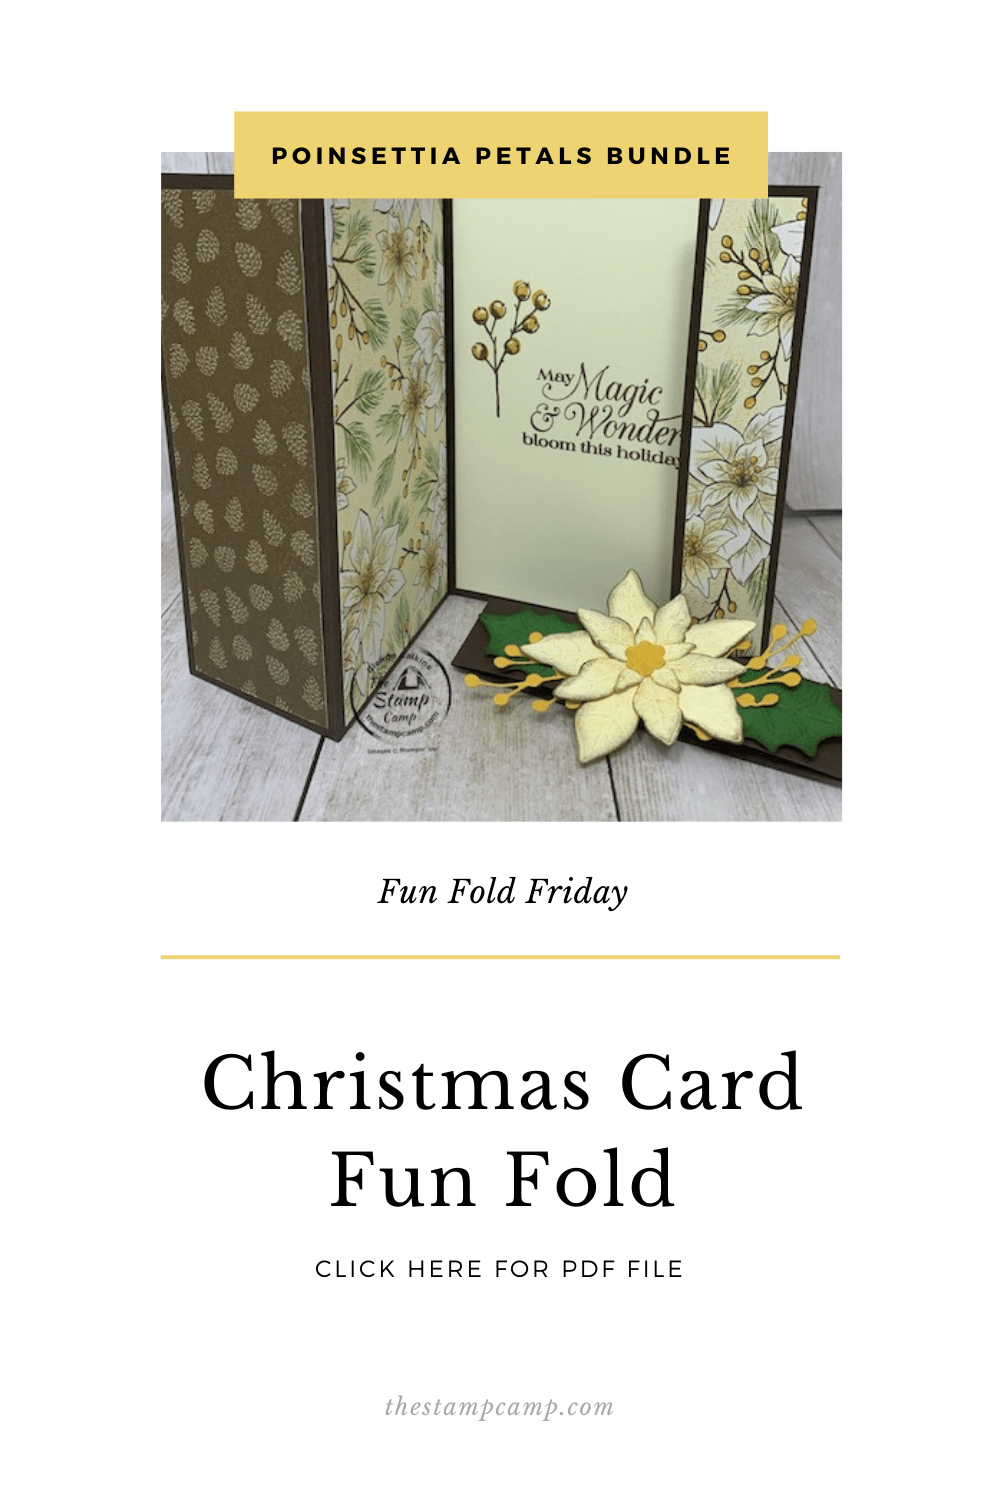 It's Fun Fold Friday and today I have a fun fold card for you using the Poinsettia Place Designer Series Paper. This fun fold is a great way to showcase both sides of the Designer Series Paper. #stampinup #thestampcamp #funfold #poinsettia